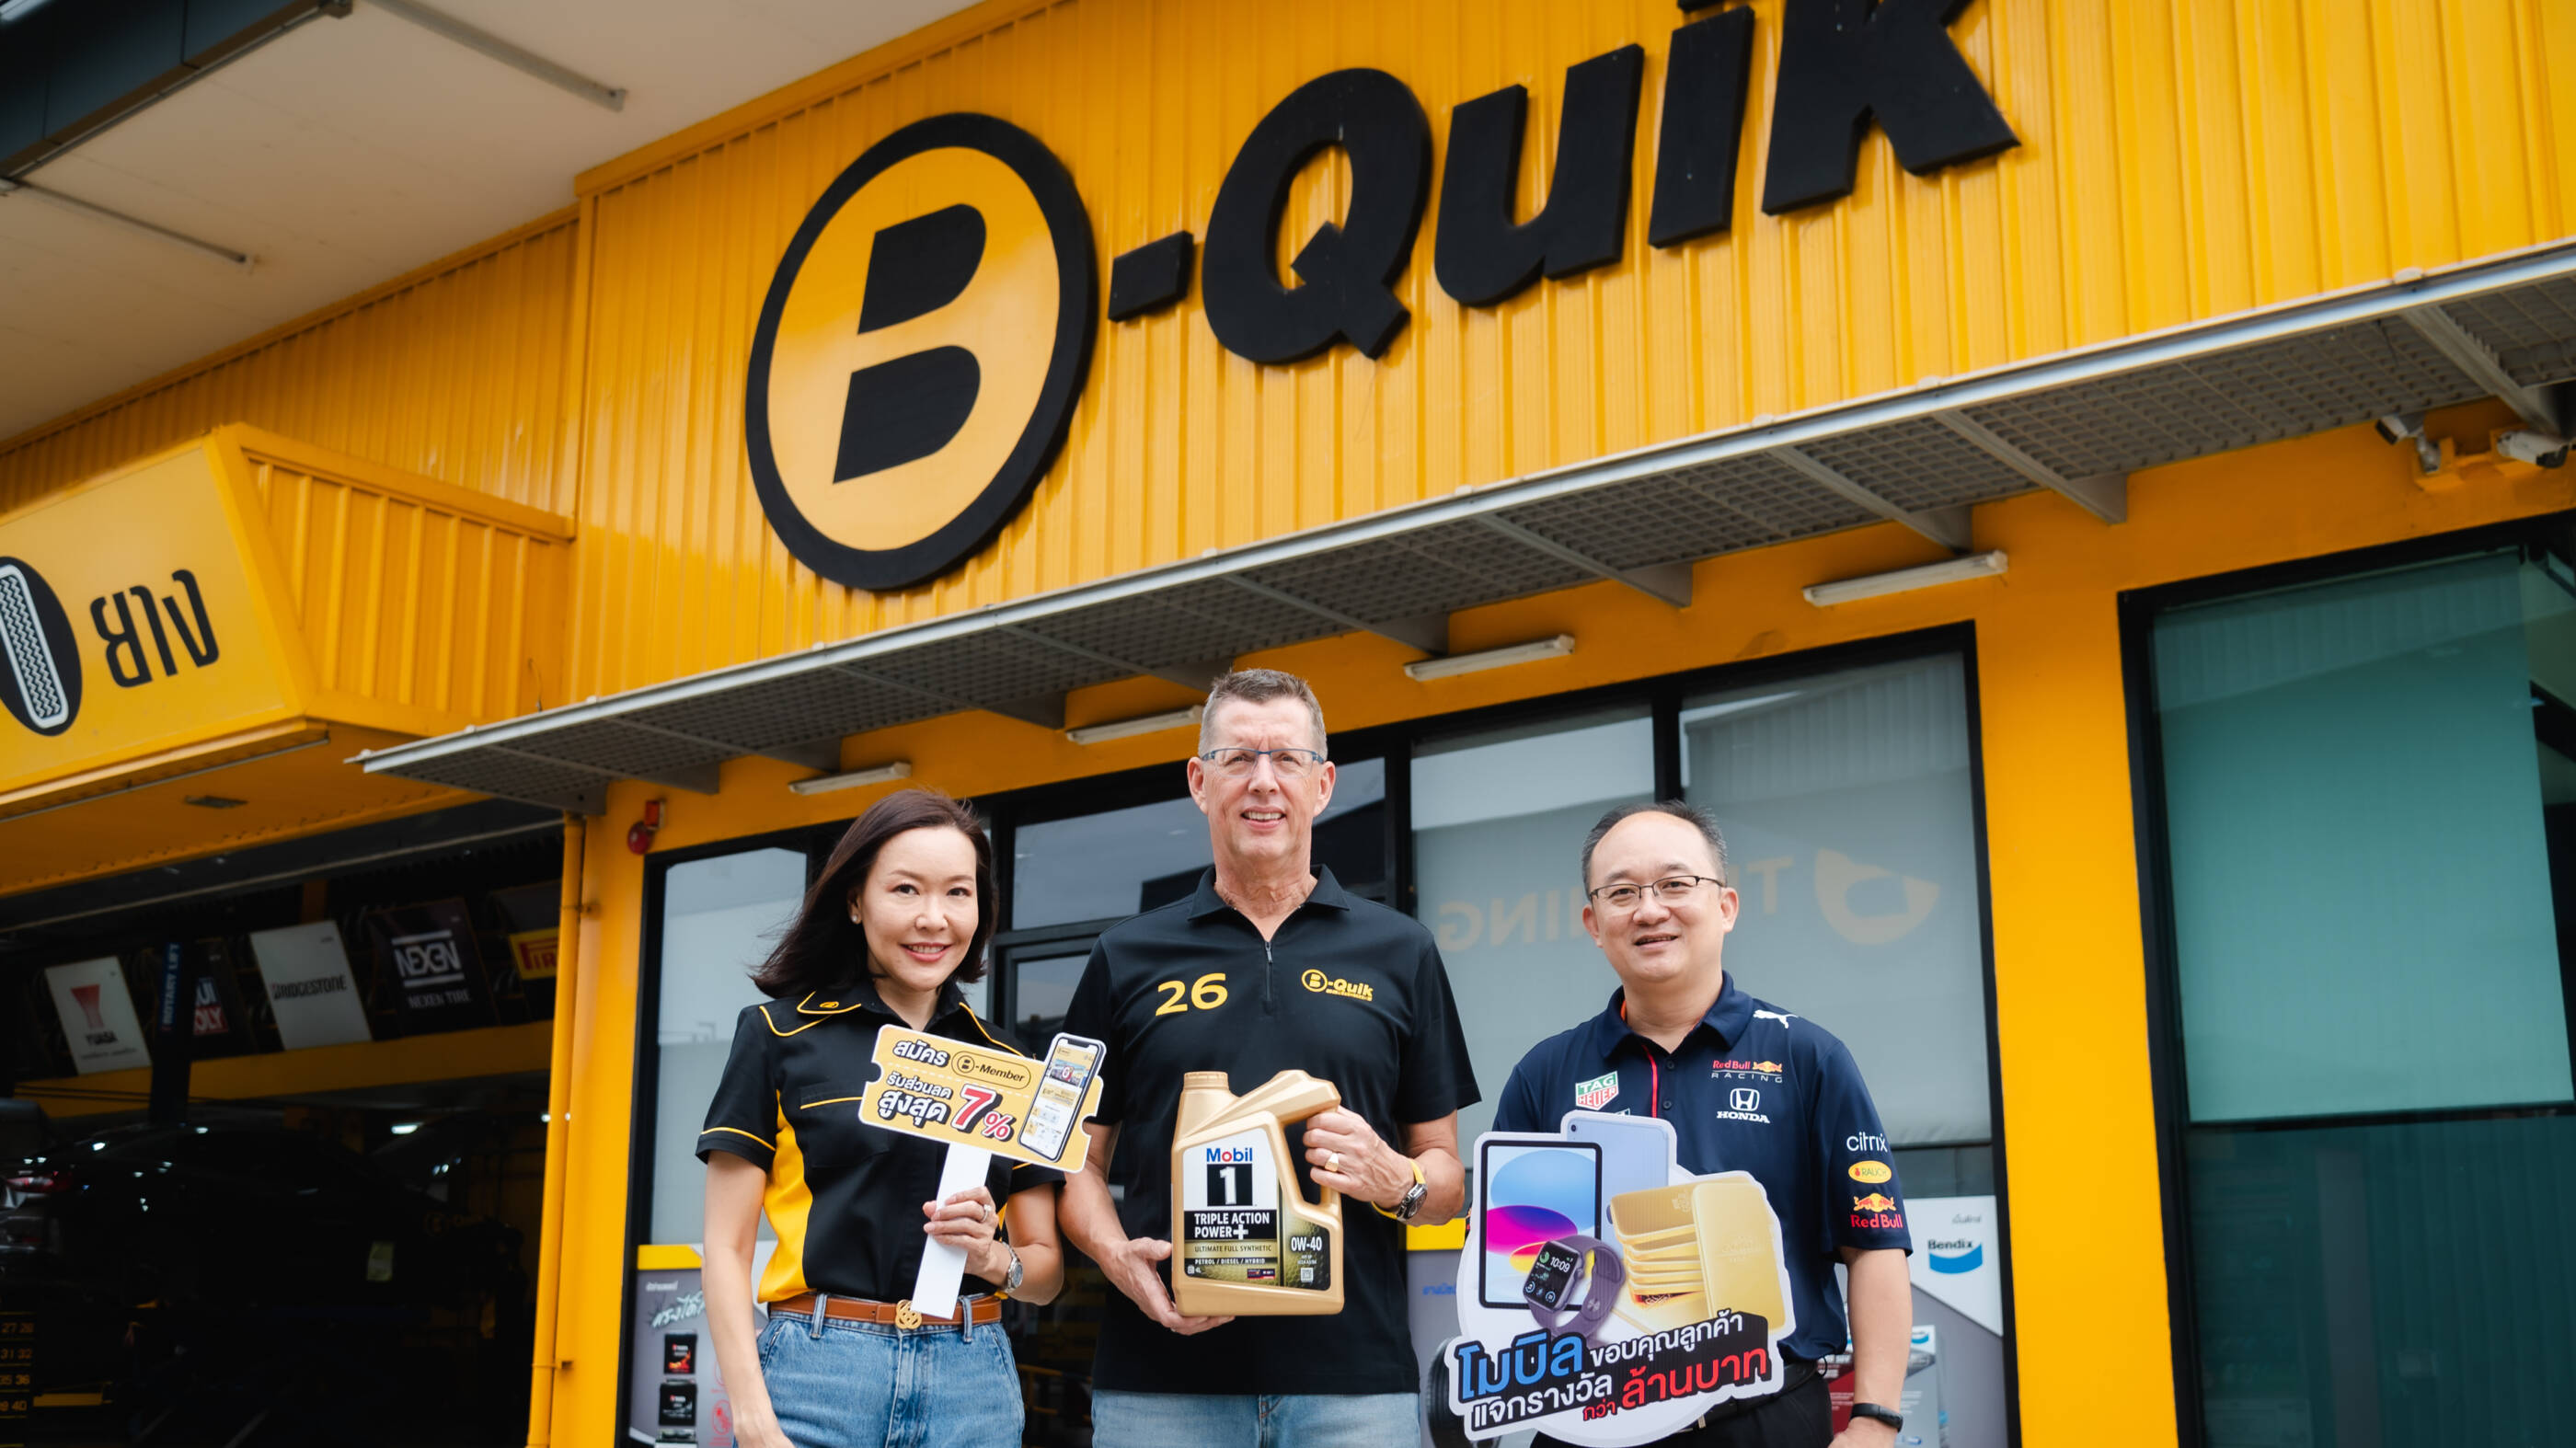 Mobil promotion with B-quik